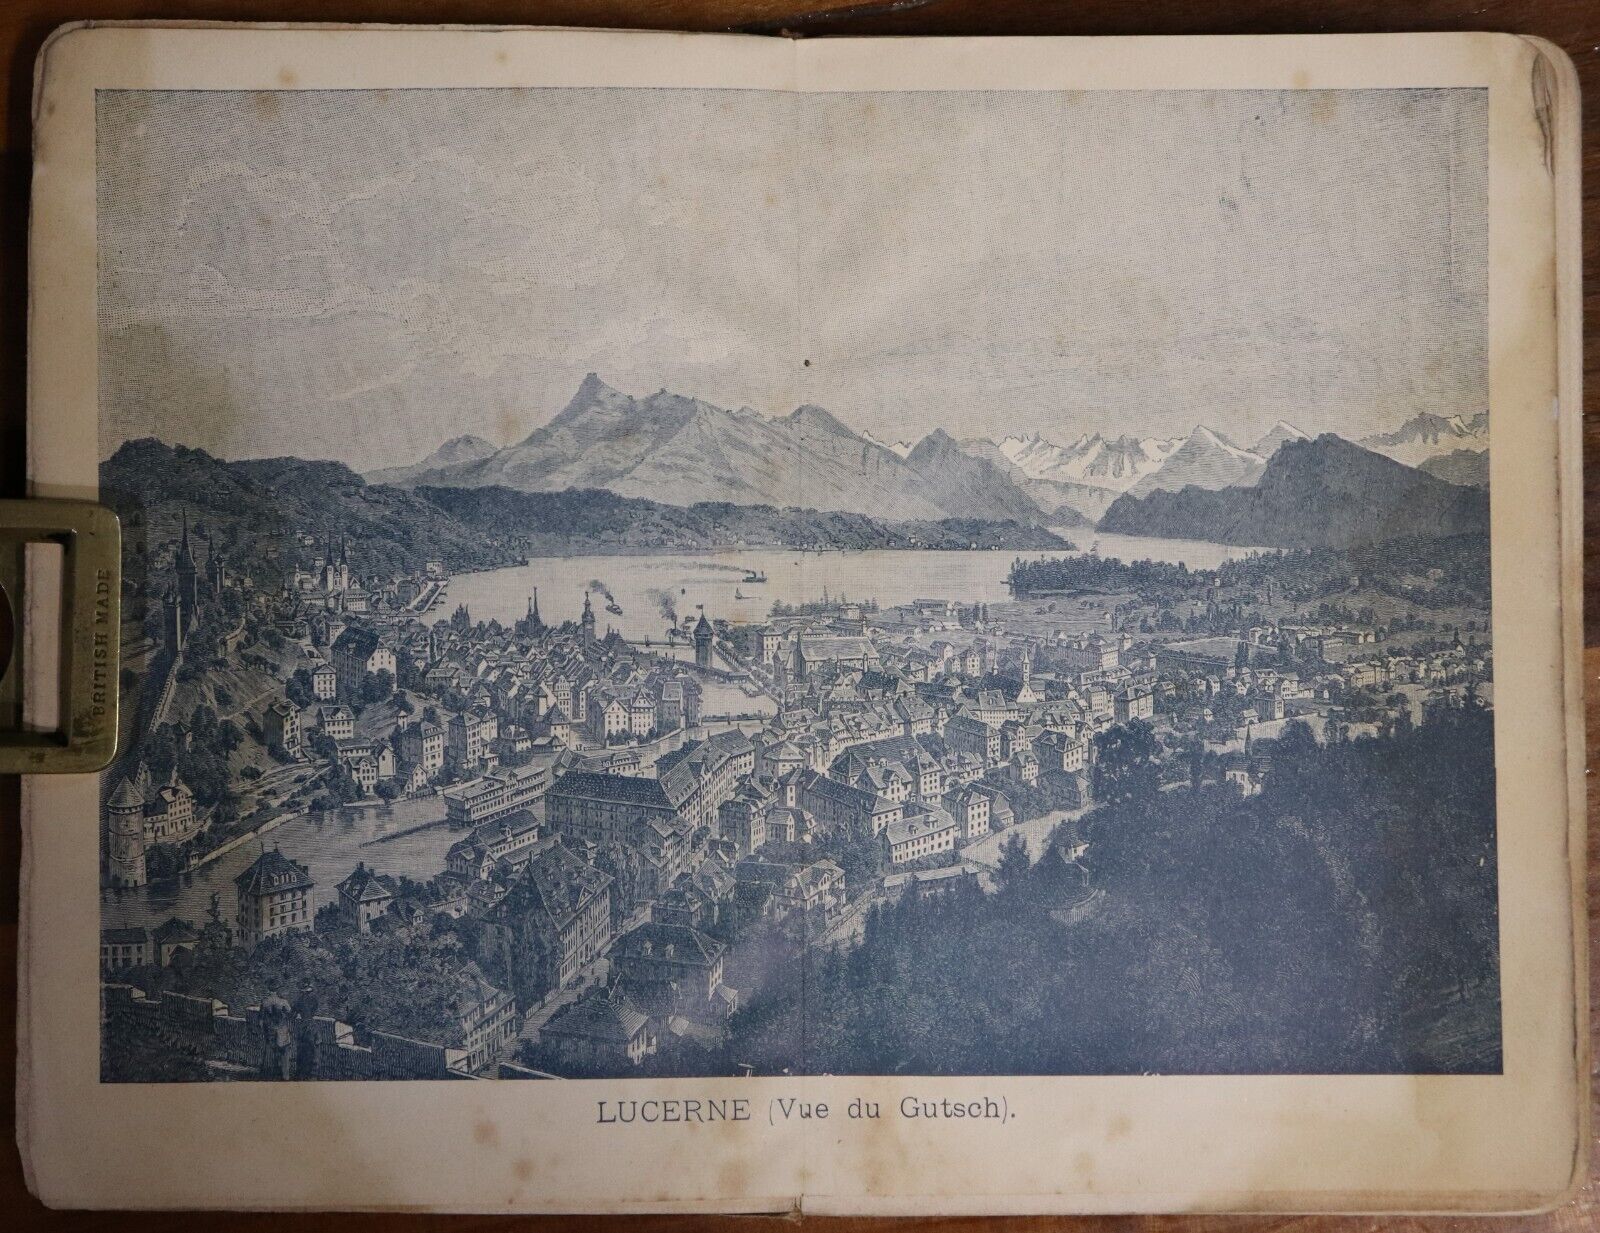 Guide To Lucerne, The Lake & Environs - 1894 - Antique Swiss Travel Book Maps